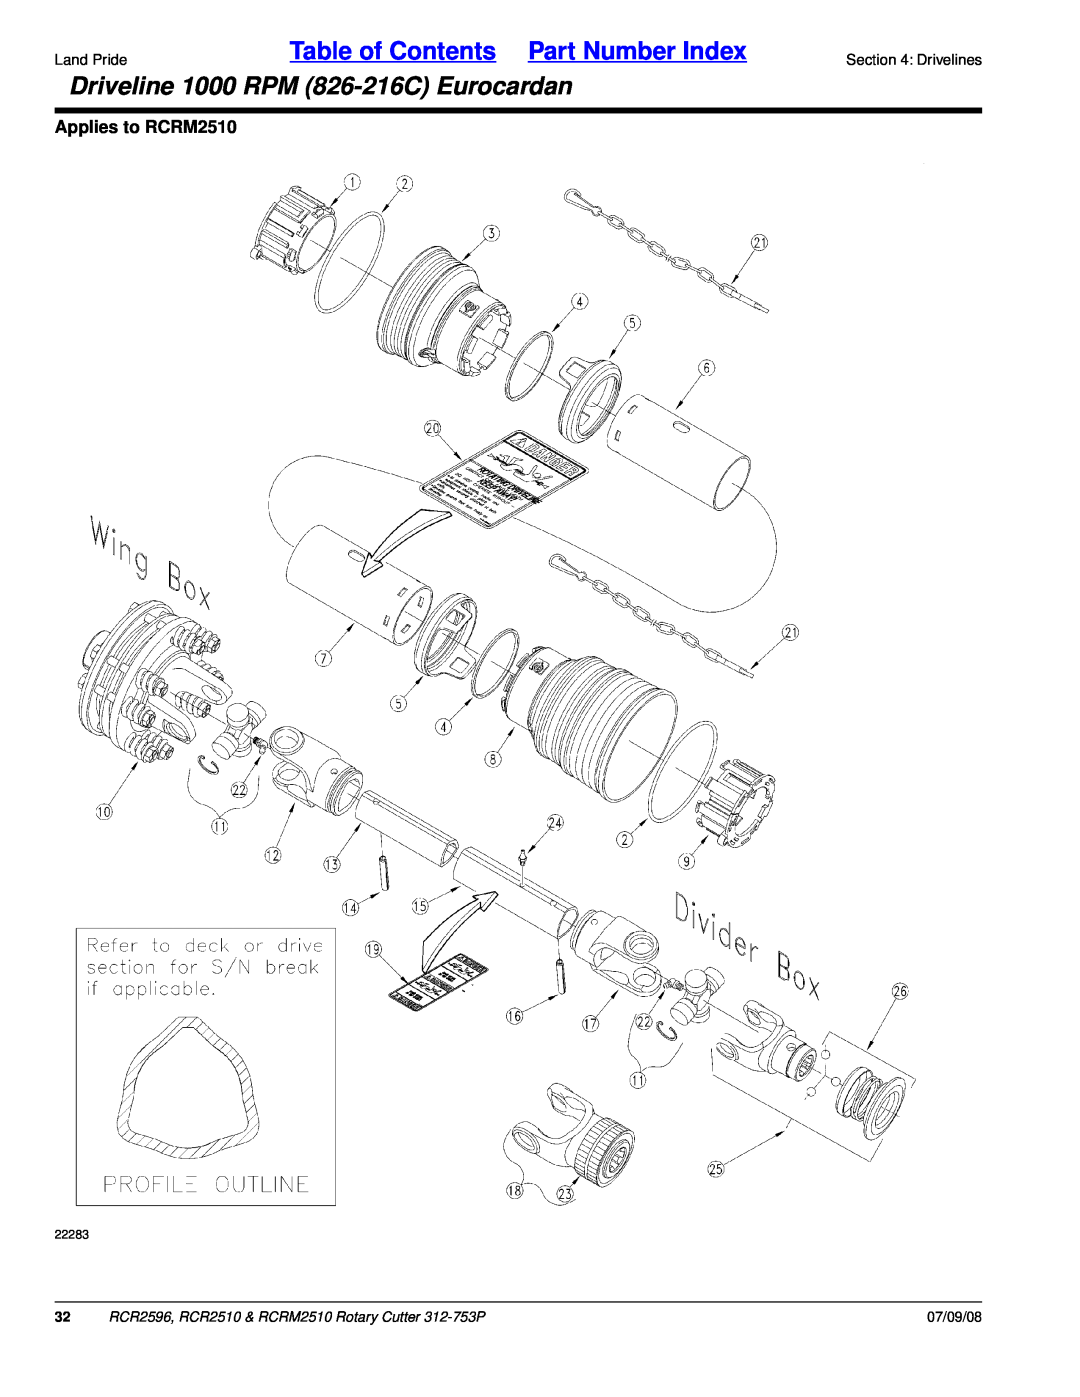 Land Pride RCR2510 manual Driveline 1000 RPM 826-216CEurocardan, Applies to RCRM2510, Table of Contents Part Number Index 